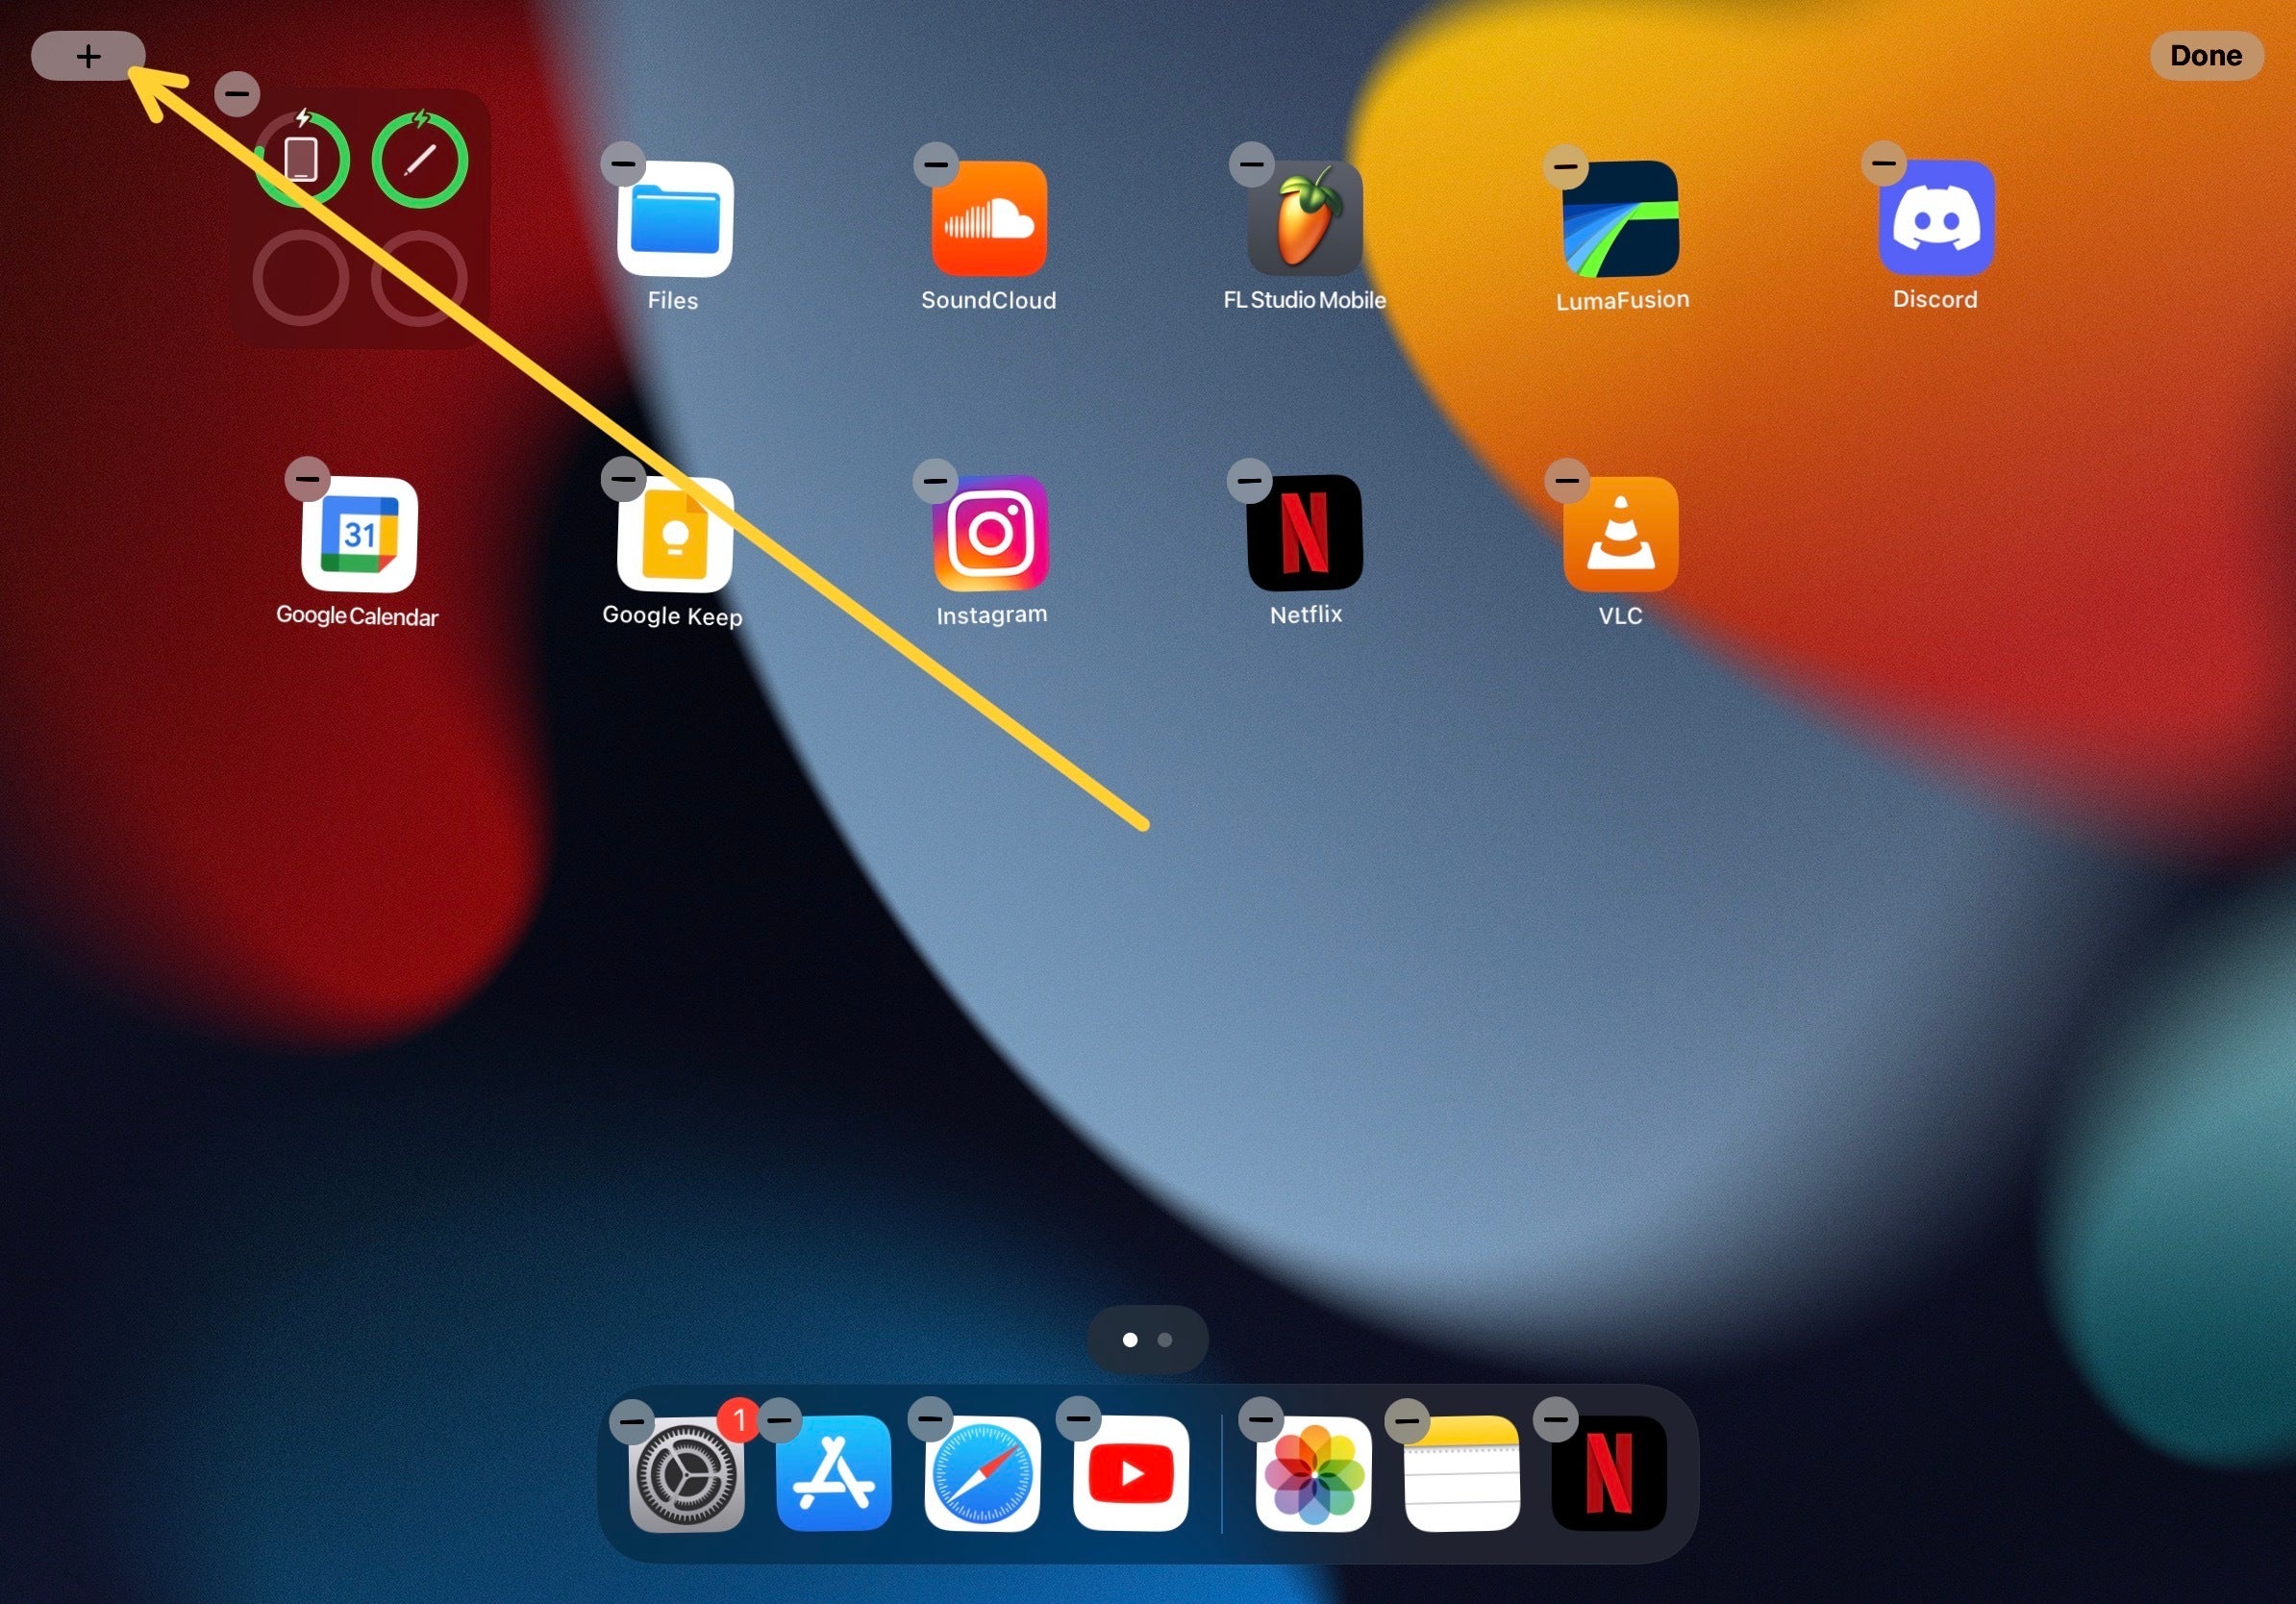 Become an iPad pro: Must-know iPad tips and tricks